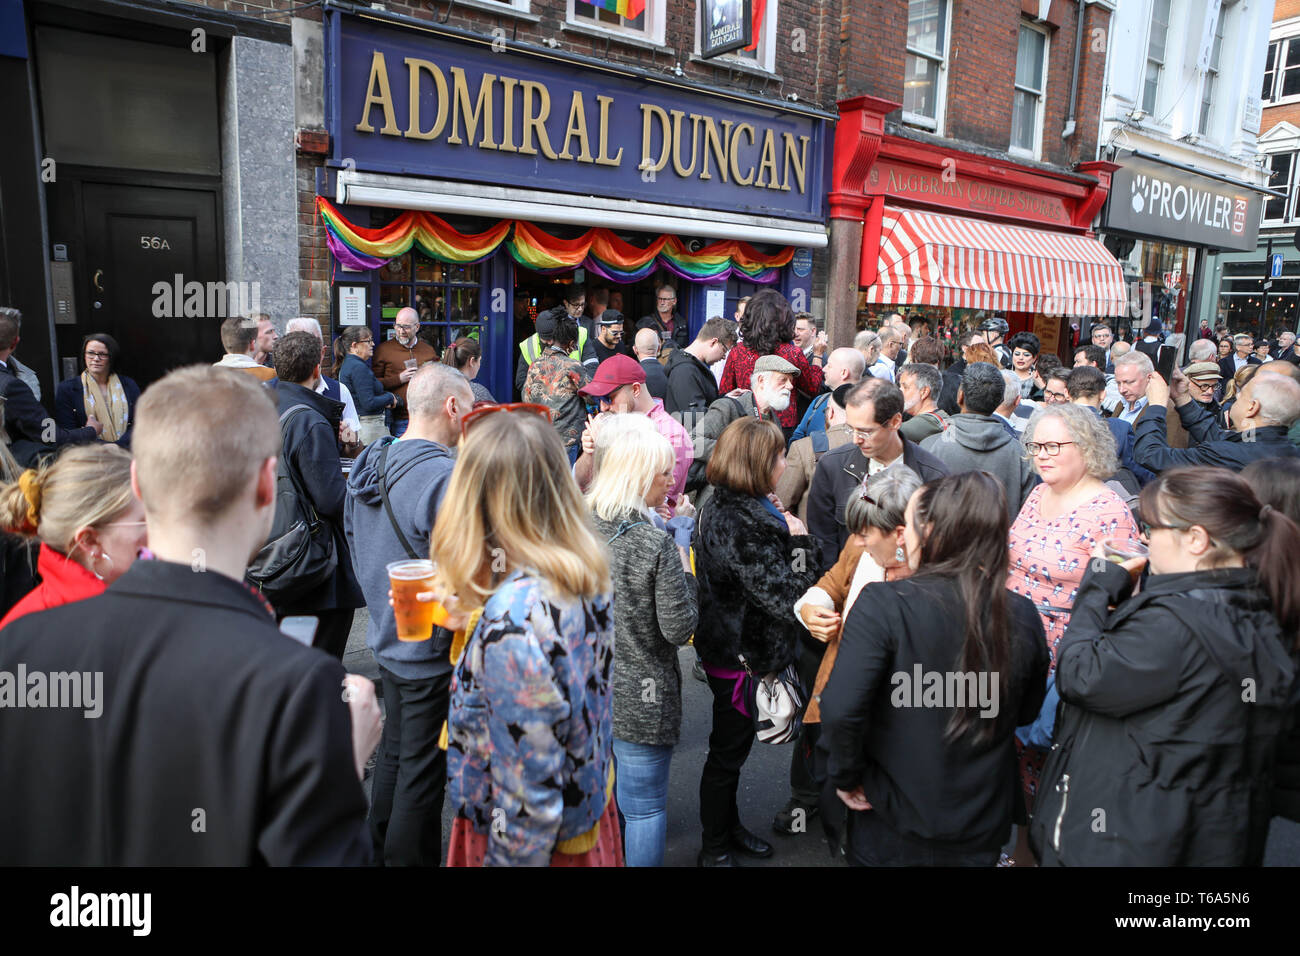 Soho, London, UK. 30th Apr, 2019. 20th anniversary of the tragic bombing at gay pub Admiral Duncan in Soho with a community-led act of Remembrance outside the historic venue in Old Compton Street. On the same day in 1999, a nail bomb attack at the pub in Soho killed three people and wounded 79. Four of the survivors had to have limbs amputated. Credit: Penelope Barritt/Alamy Live News Stock Photo